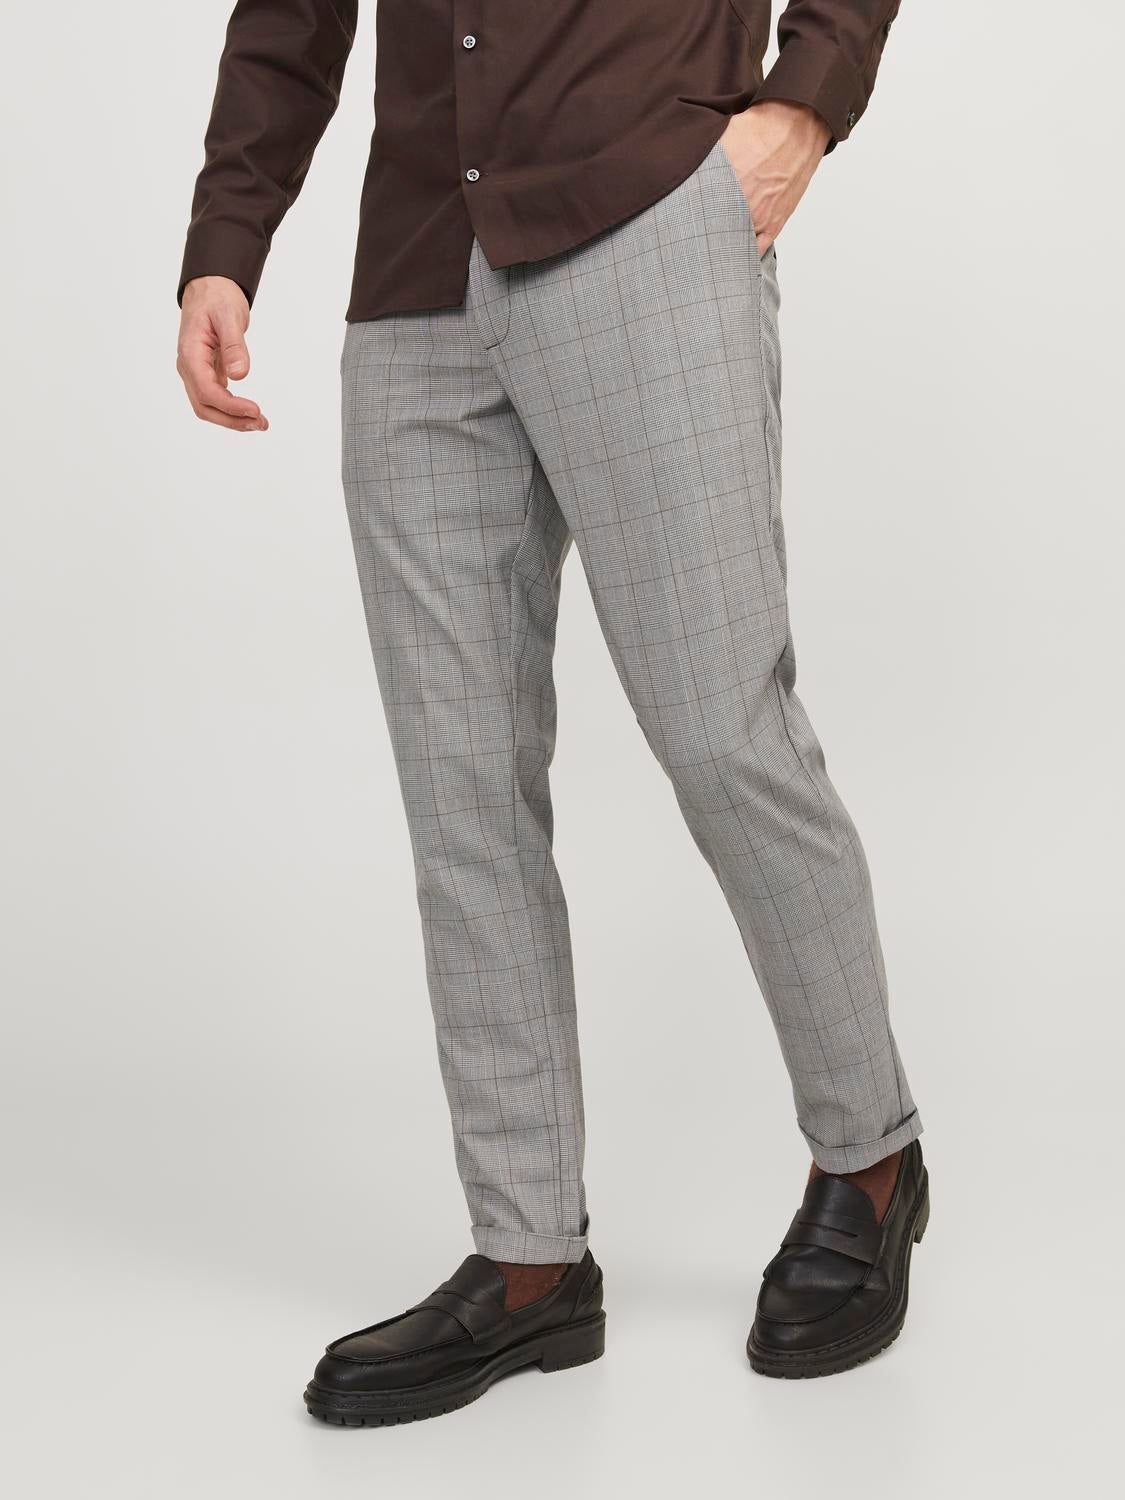 Men's Grey Plaid Tailored Fit Pants - 1913 Collection